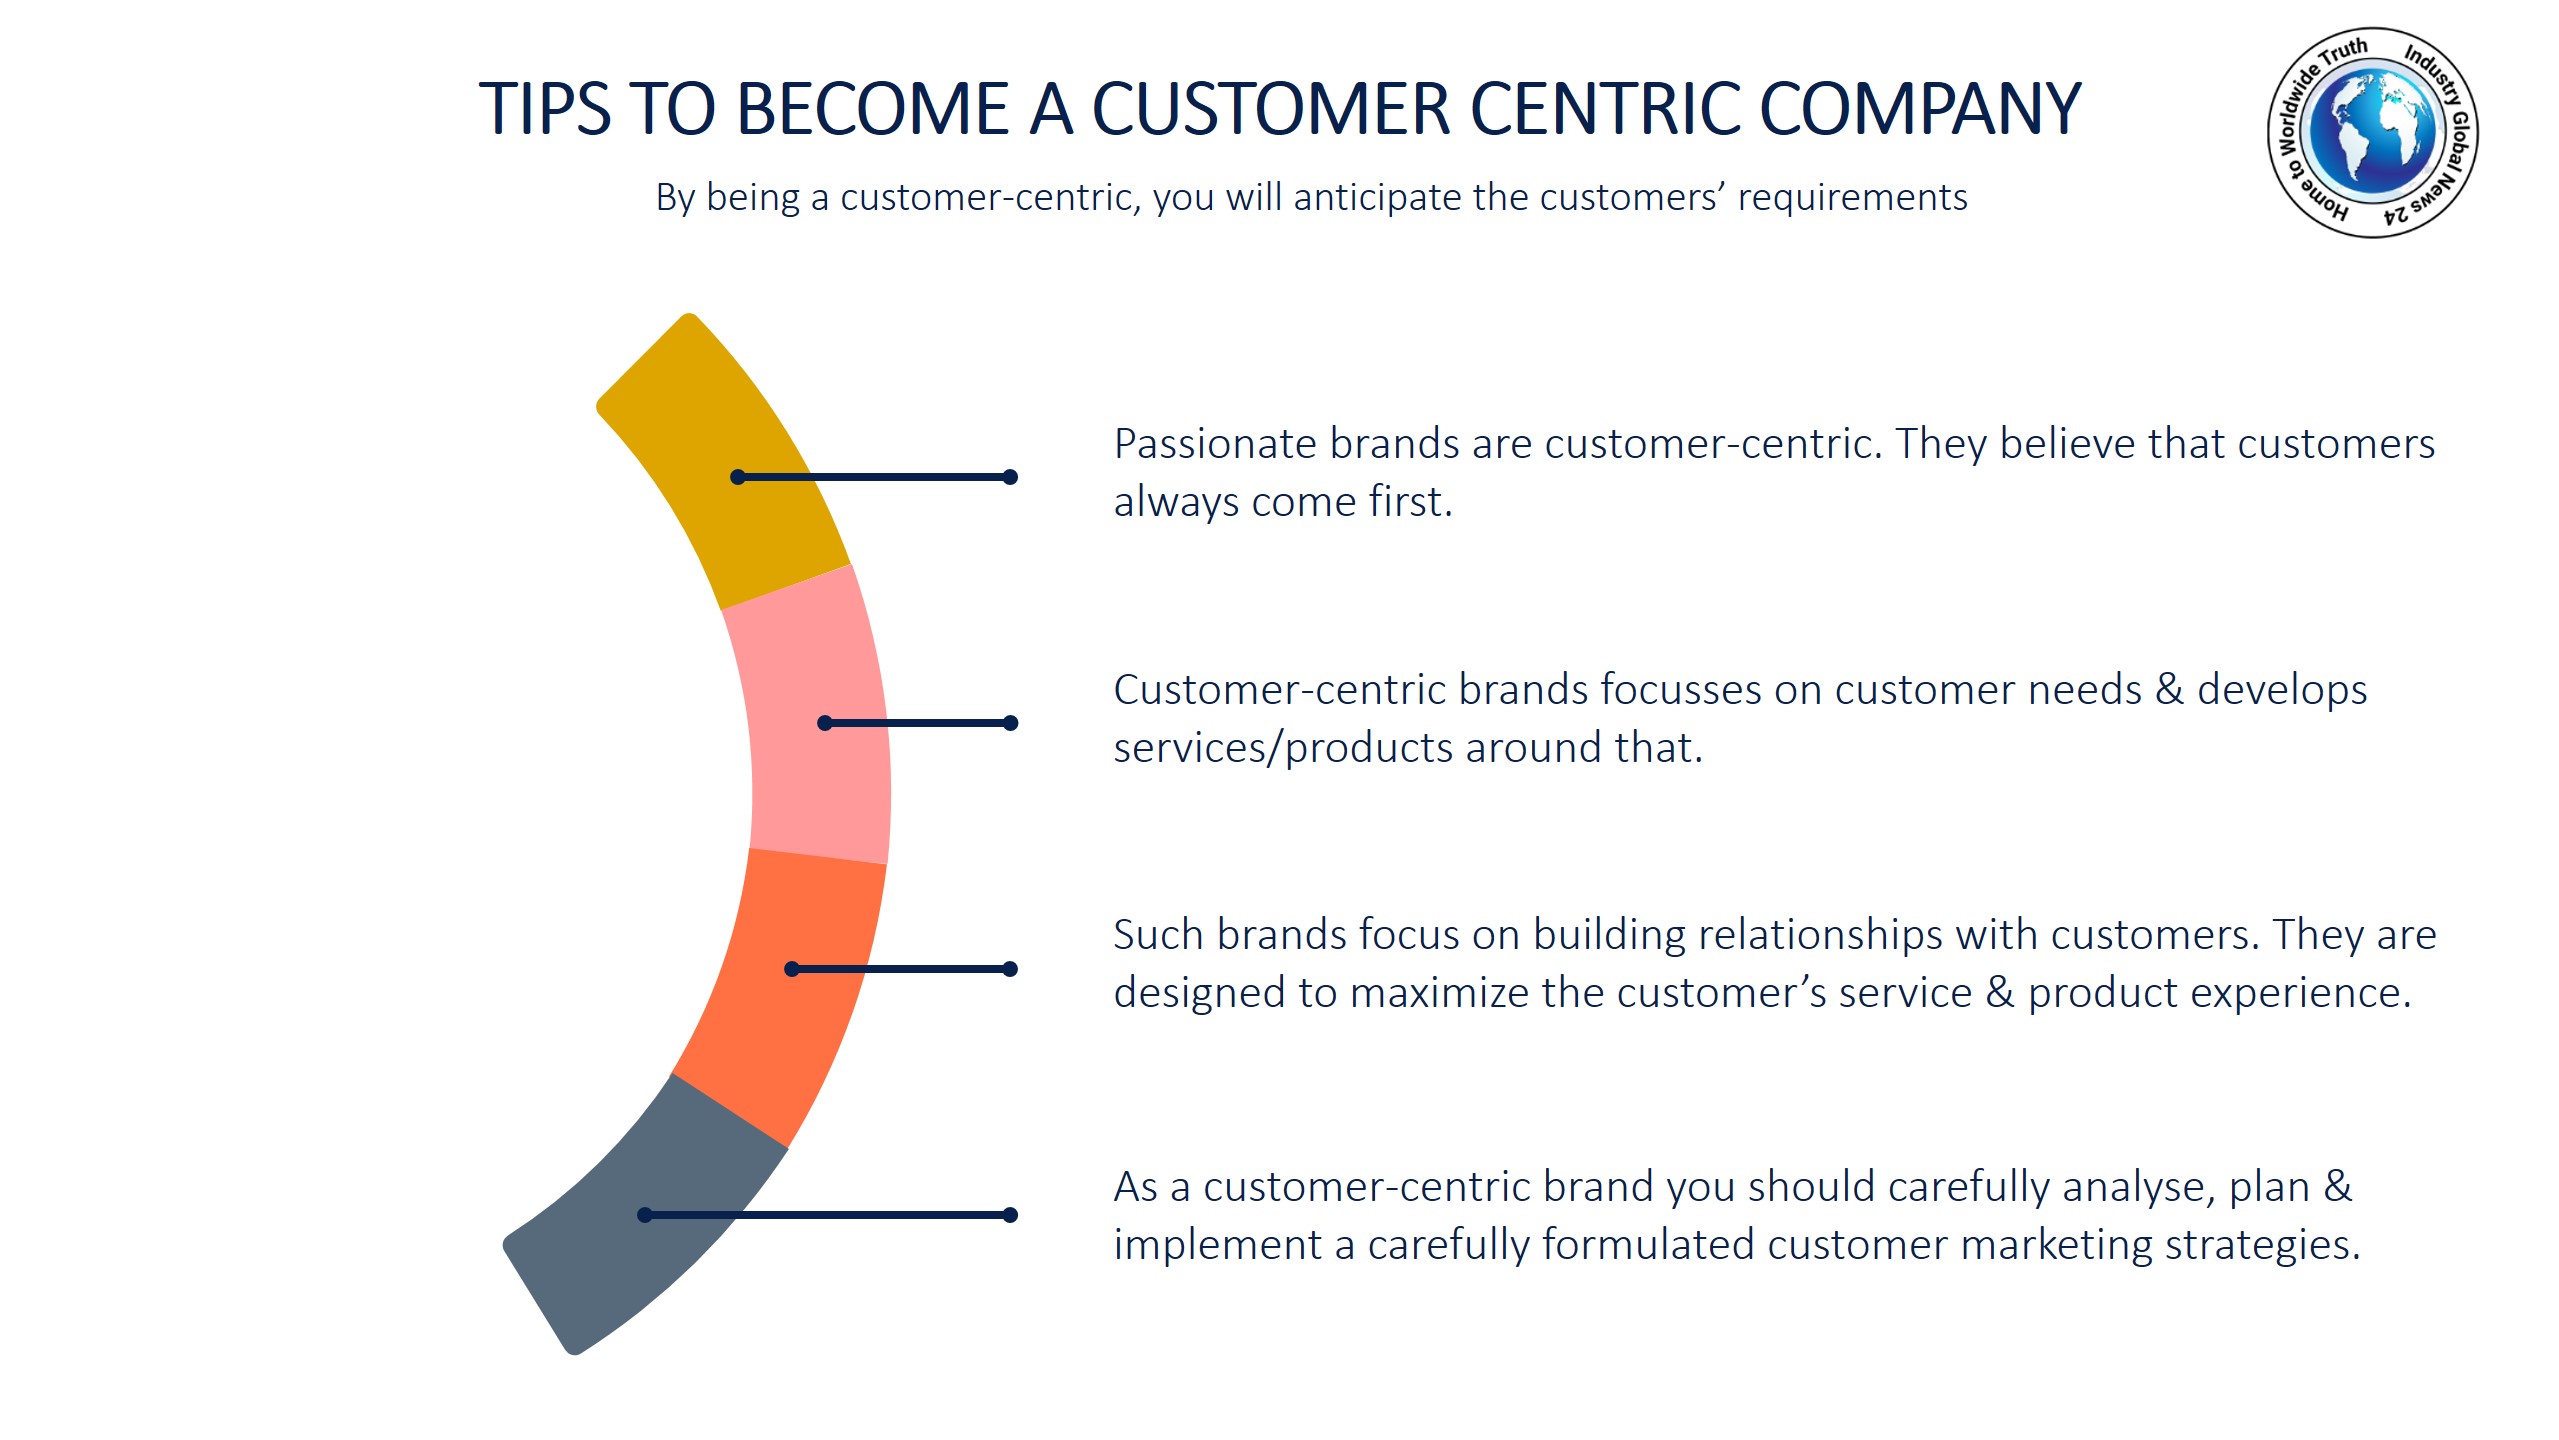 Tips to become a customer centric company